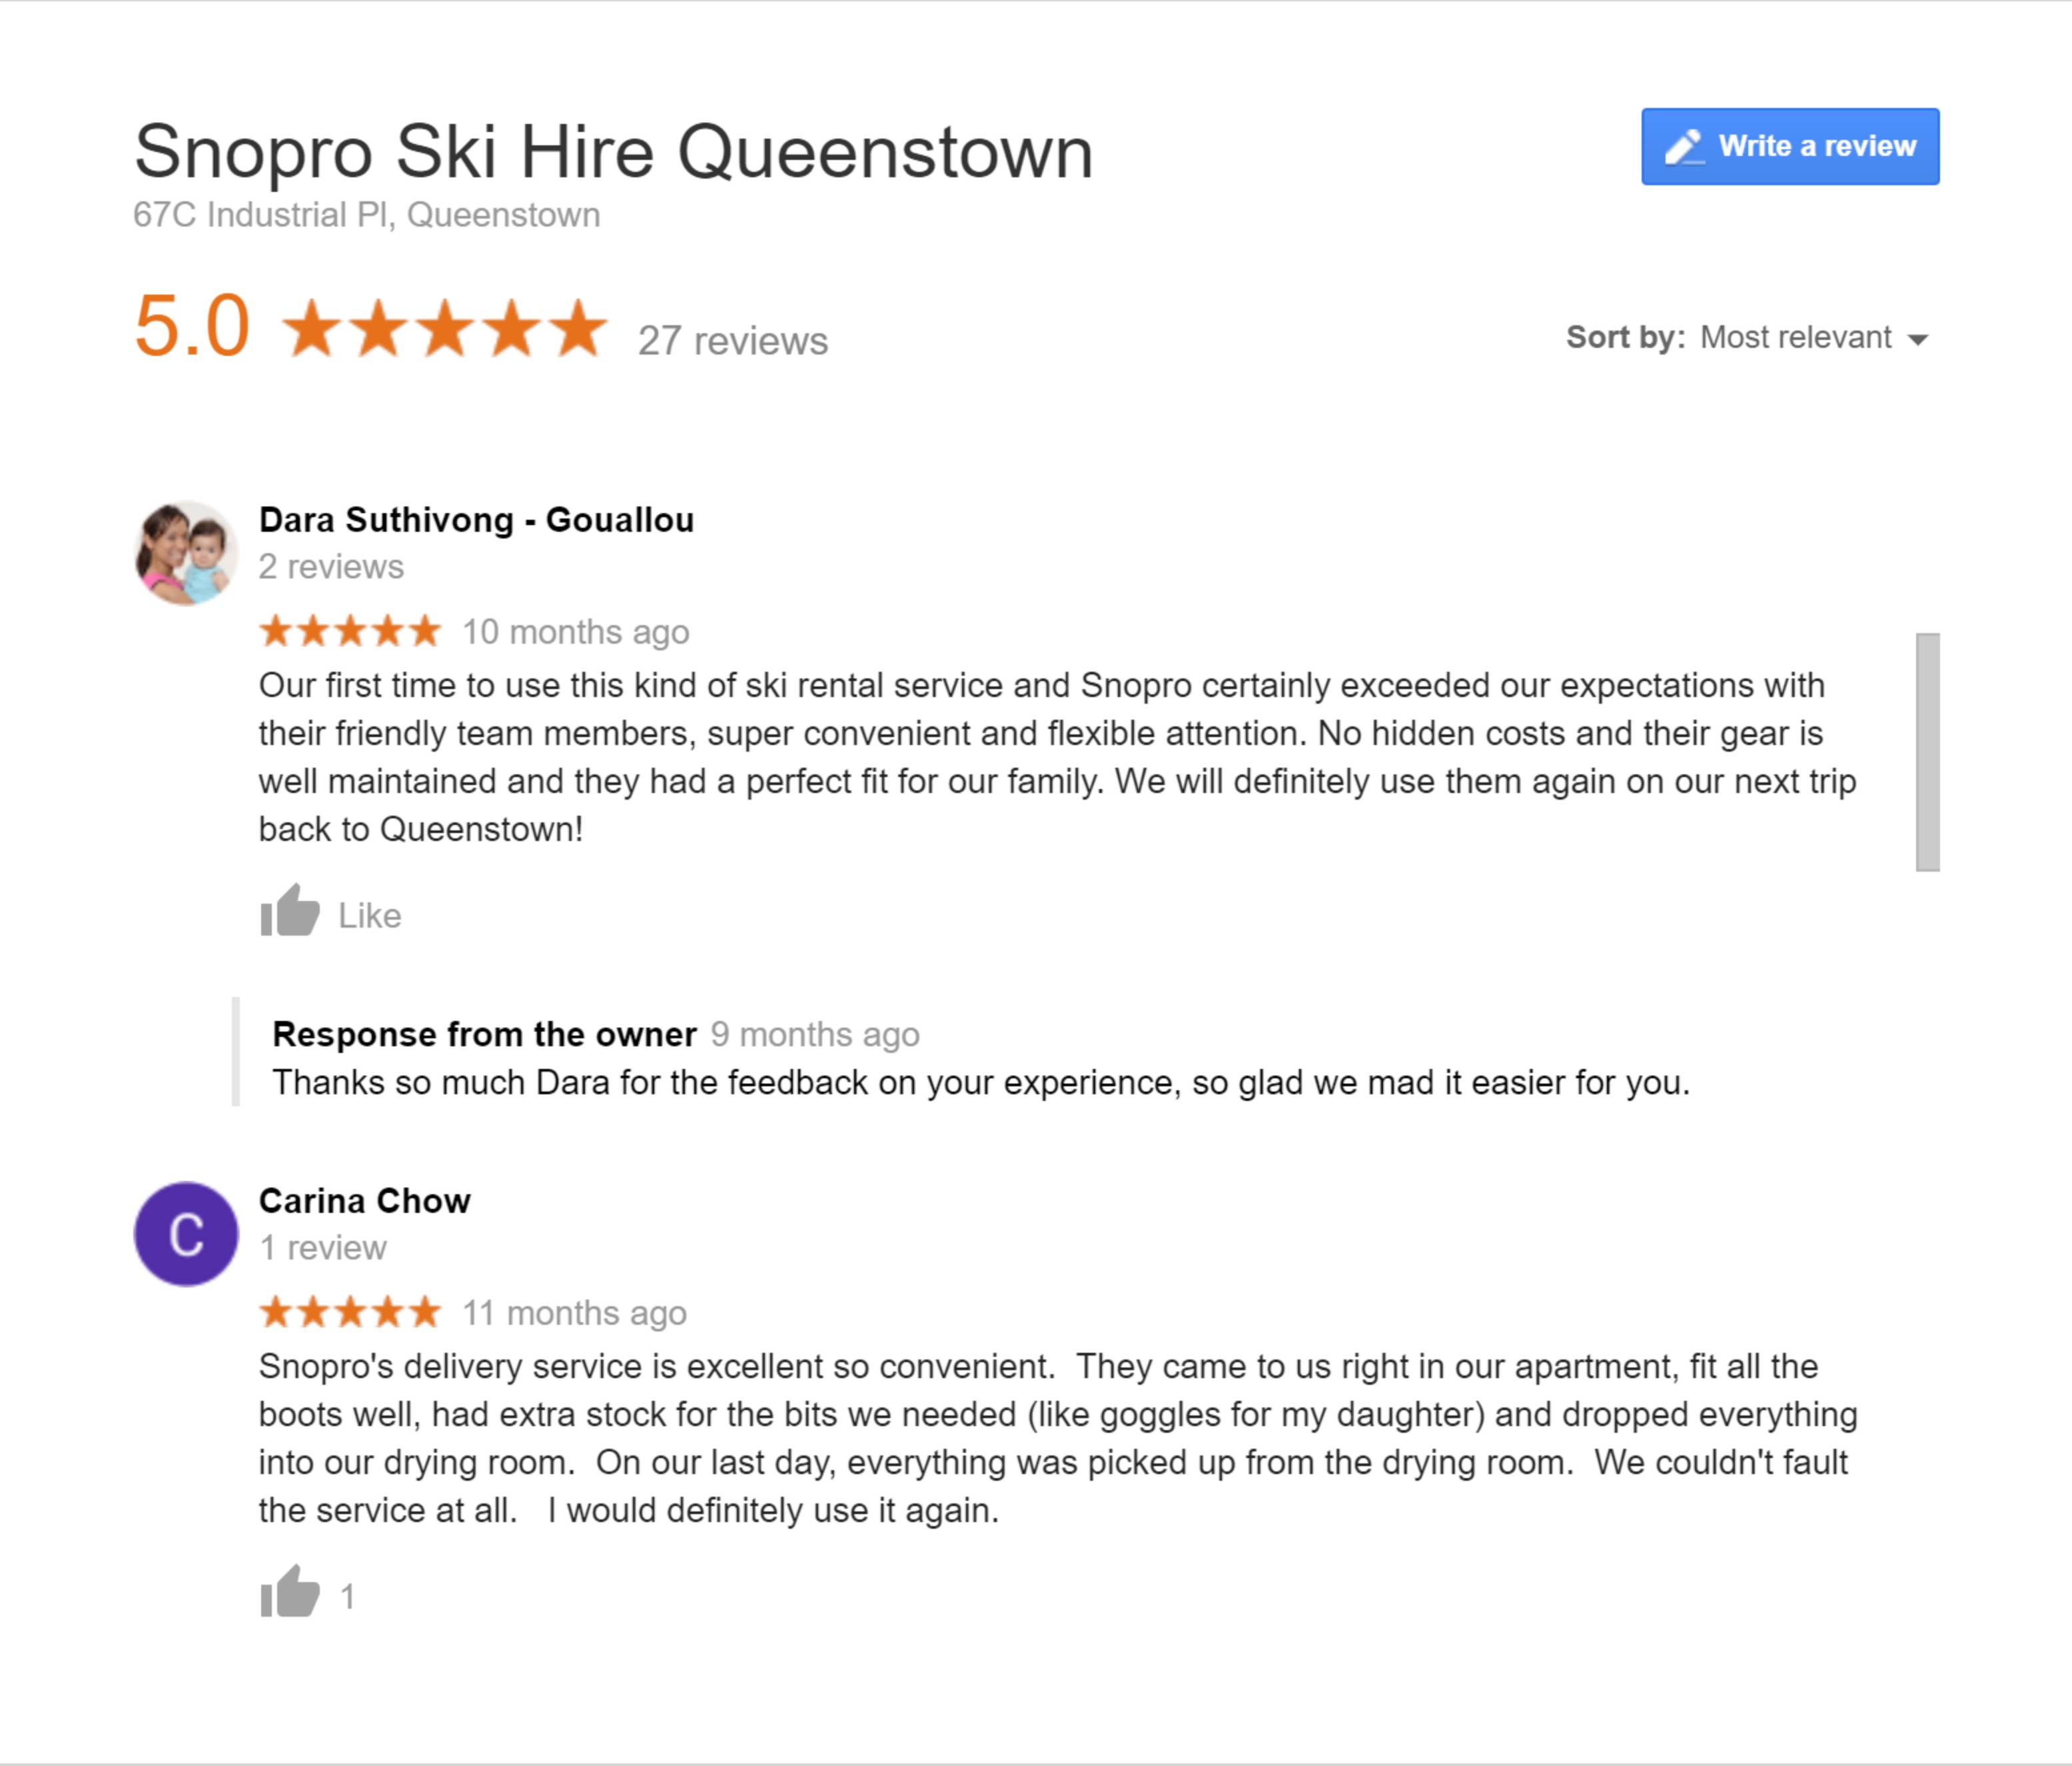 Google reviews of Snopro ski hire in Queenstown and Wanaka